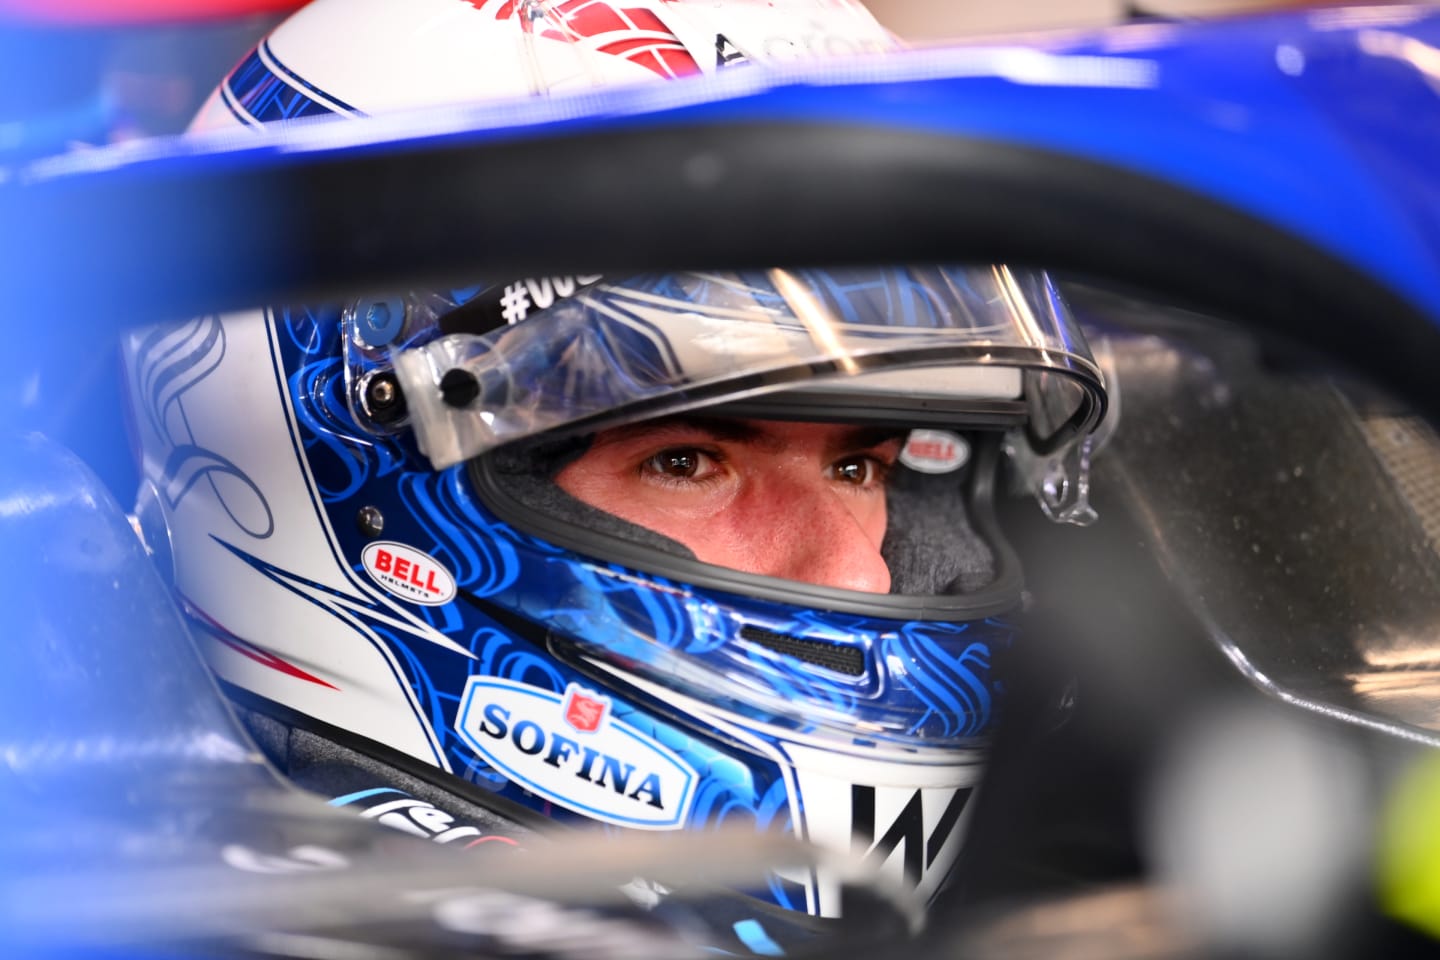 BUDAPEST, HUNGARY - JULY 30: Nicholas Latifi of Canada and Williams looks on in the garage during final practice ahead of the F1 Grand Prix of Hungary at Hungaroring on July 30, 2022 in Budapest, Hungary. (Photo by Dan Mullan/Getty Images)